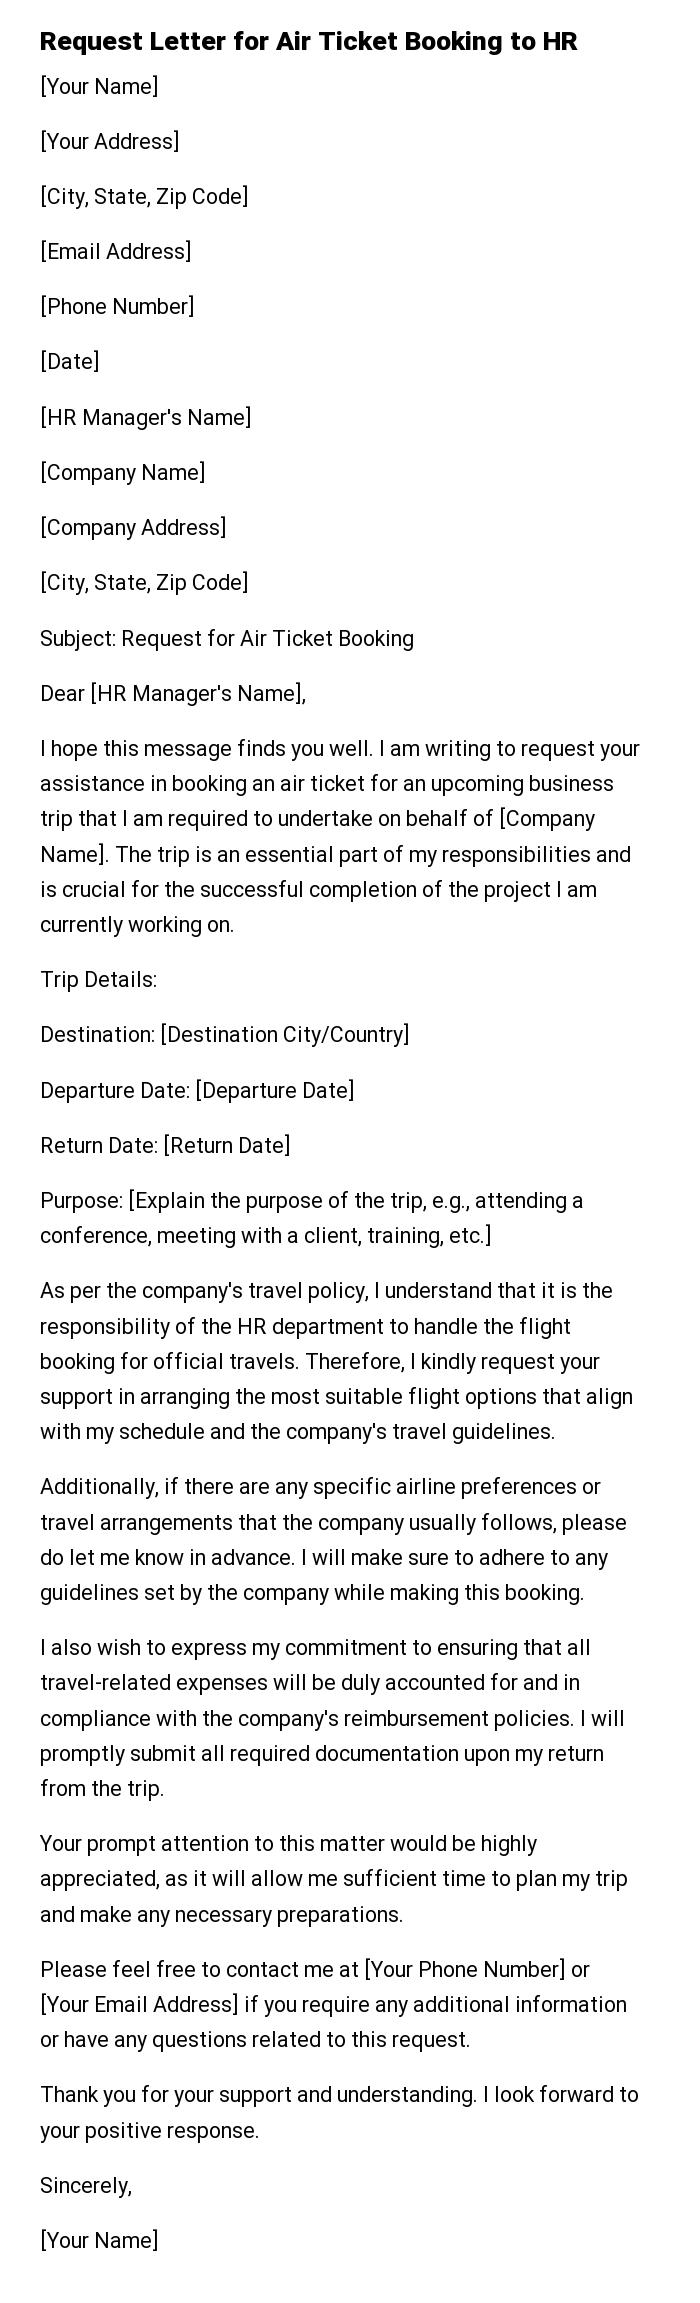 Request Letter for Air Ticket Booking to HR